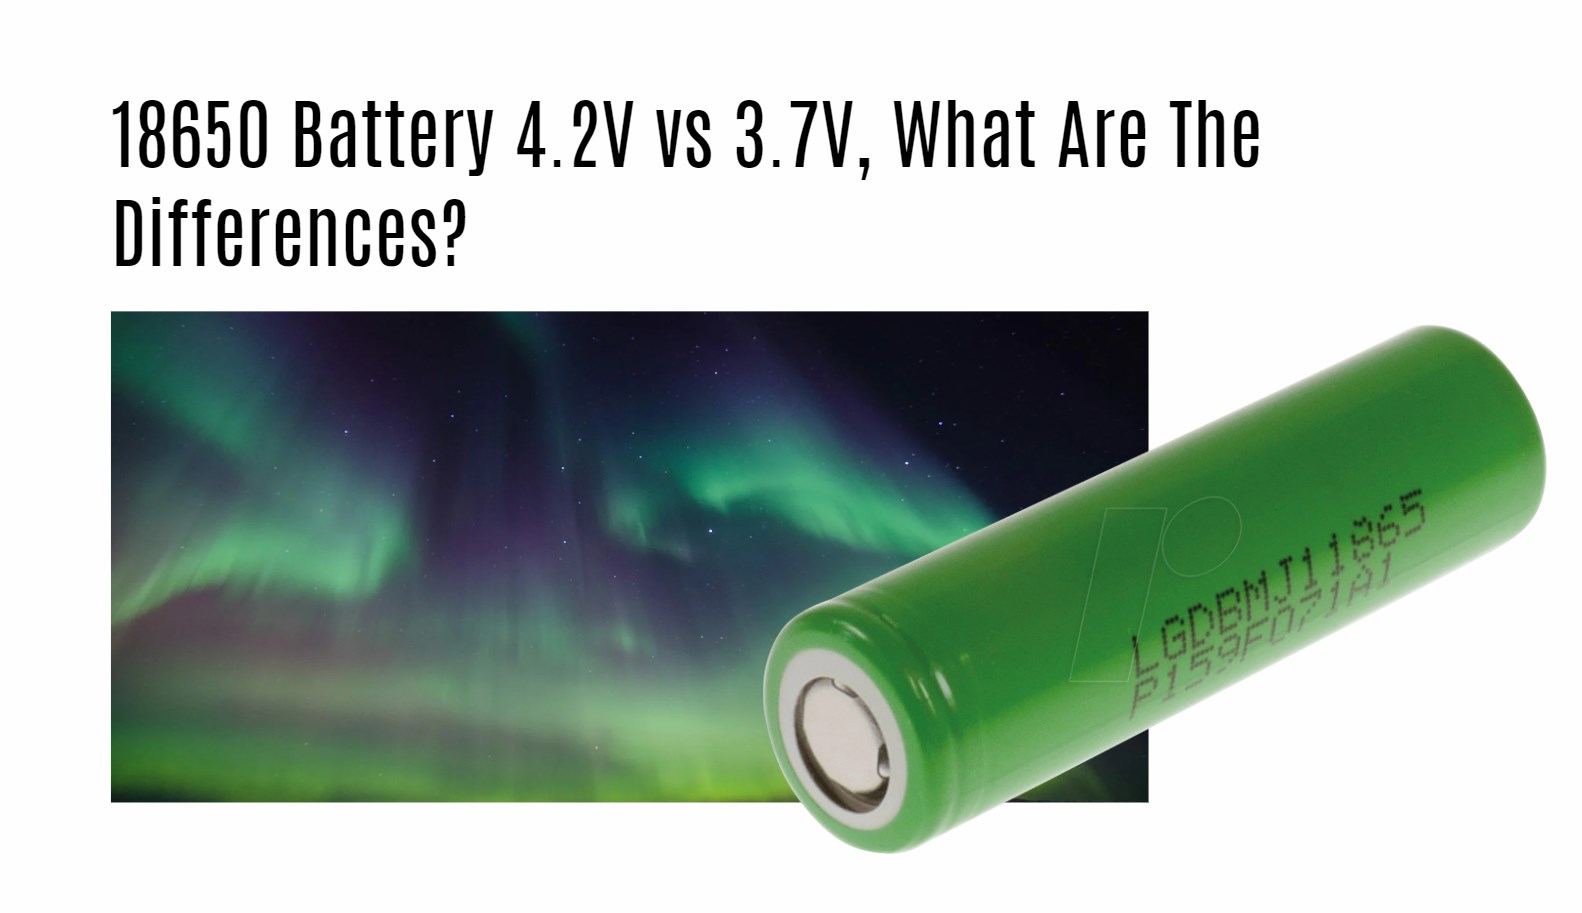 18650 Battery 4.2V vs 3.7V, What Are The Differences?